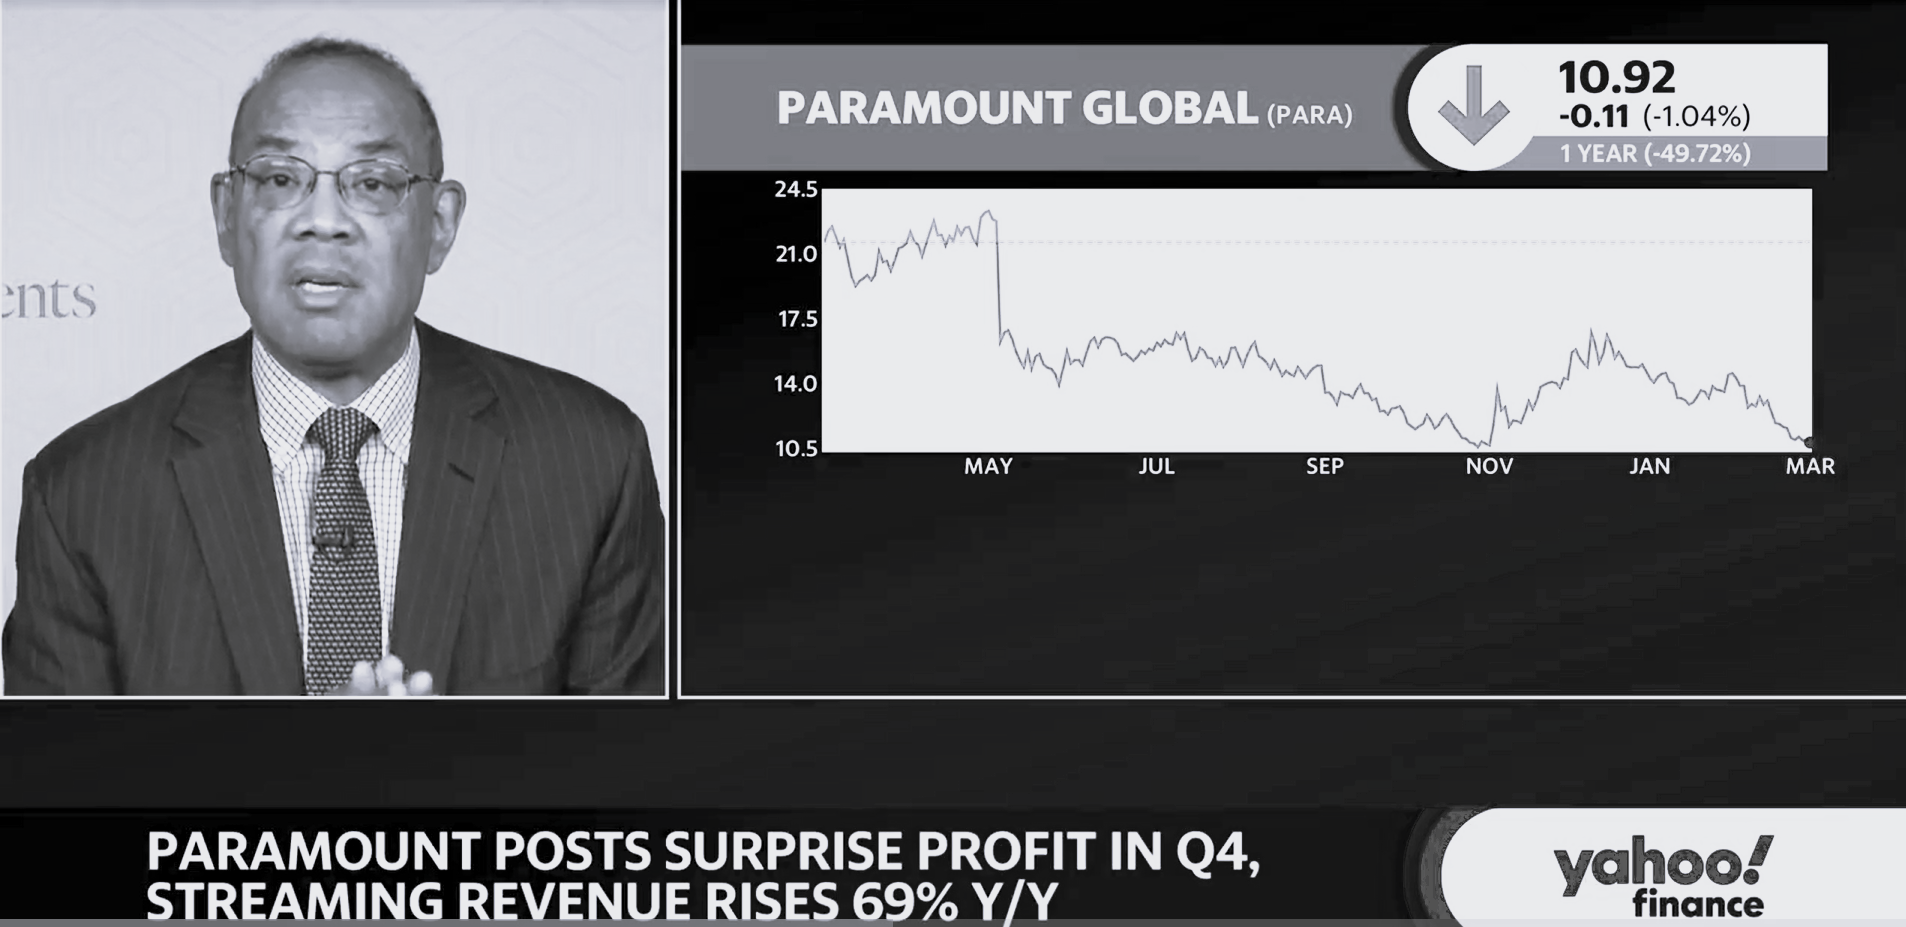 John Rogers on Yahoo Finance discussing Paramount Global